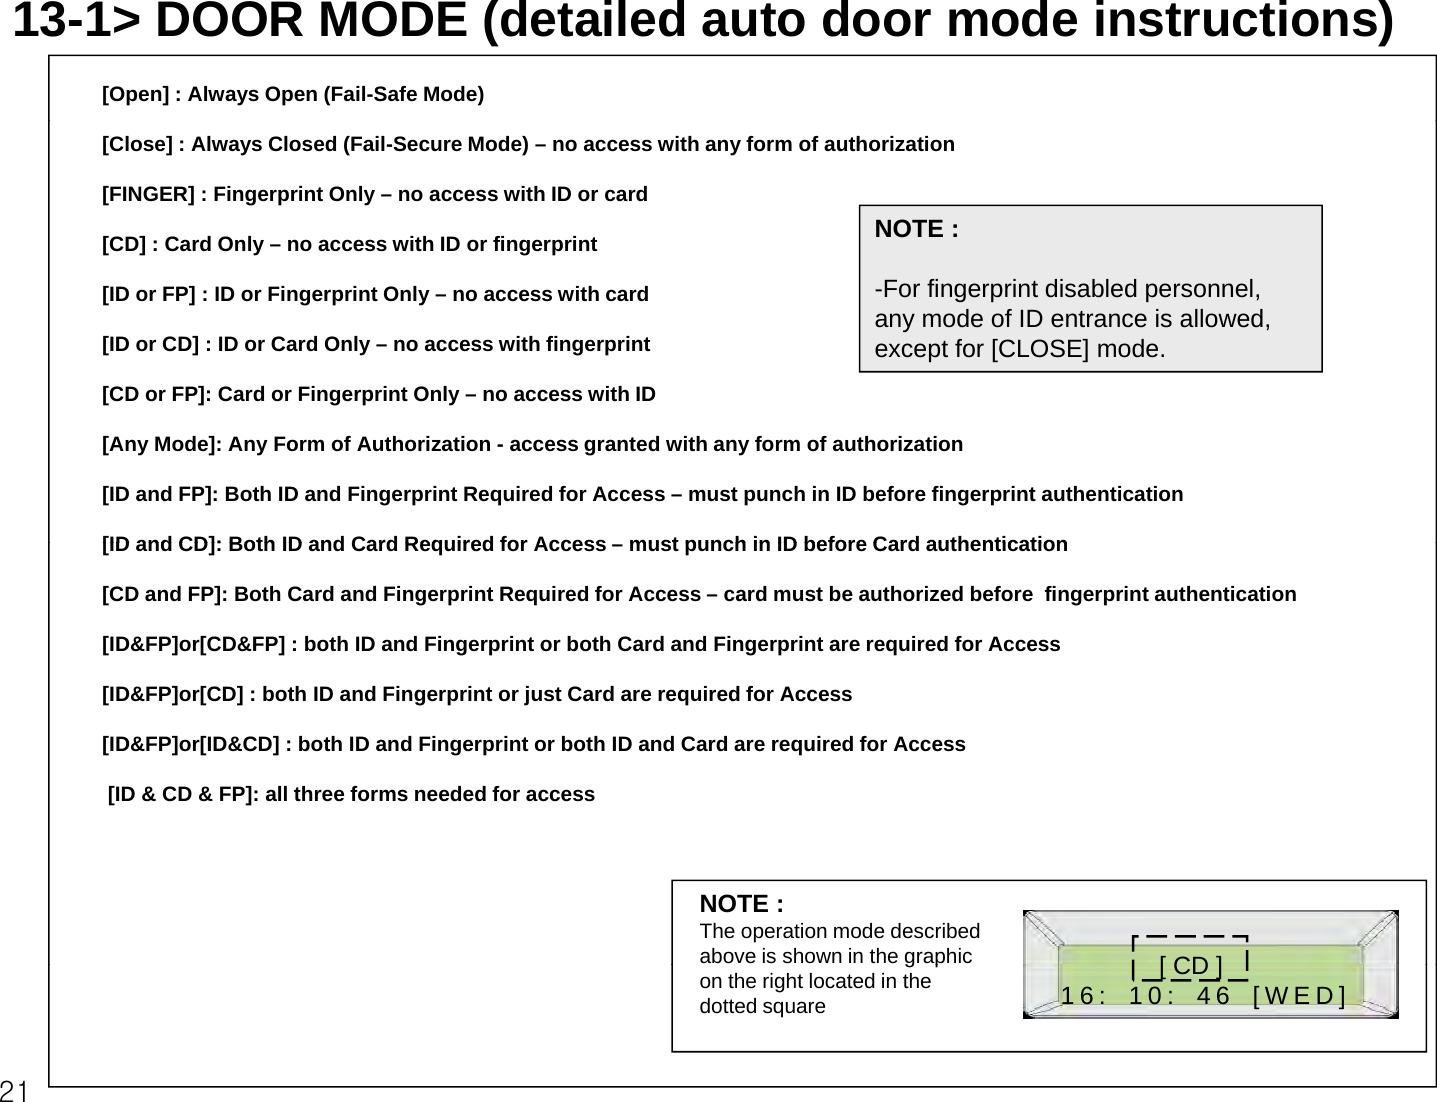 13-1&gt; DOOR MODE (detailed auto door mode instructions)[Open] : Always Open (Fail-Safe Mode) [Close] : Always Closed (Fail-Secure Mode) – no access with any form of authorization[FINGER] : Fingerprint Only – no access with ID or card[CD] : Card Only – no access with ID or fingerprint NOTE :[ID or FP] : ID or Fingerprint Only – no access with card[ID or CD] : ID or Card Only – no access with fingerprint [CD or FP]: Card or Fingerprint Only –no access with ID-For fingerprint disabled personnel, any mode of ID entrance is allowed, except for [CLOSE] mode.[] gpy[Any Mode]: Any Form of Authorization - access granted with any form of authorization [ID and FP]: Both ID and Fingerprint Required for Access – must punch in ID before fingerprint authentication [ID and CD]: Both ID and Card Required for Accessmust punch in ID before Card authentication[ID and CD]: Both ID and Card Required for Access –must punch in ID before Card authentication [CD and FP]: Both Card and Fingerprint Required for Access – card must be authorized before  fingerprint authentication[ID&amp;FP]or[CD&amp;FP] : both ID and Fingerprint or both Card and Fingerprint are required for Access[ID&amp;FP]or[CD] : both ID and Fingerprint or just Card are required for Access[ID&amp;FP]or[ID&amp;CD] : both ID and Fingerprint or both ID and Card are required for Access[ID &amp; CD &amp; FP]: all three forms needed for access[CD]NOTE :The operation mode described above is shown in the graphic 21[ CD ] 16: 10: 46 [WED]gpon the right located in the dotted square